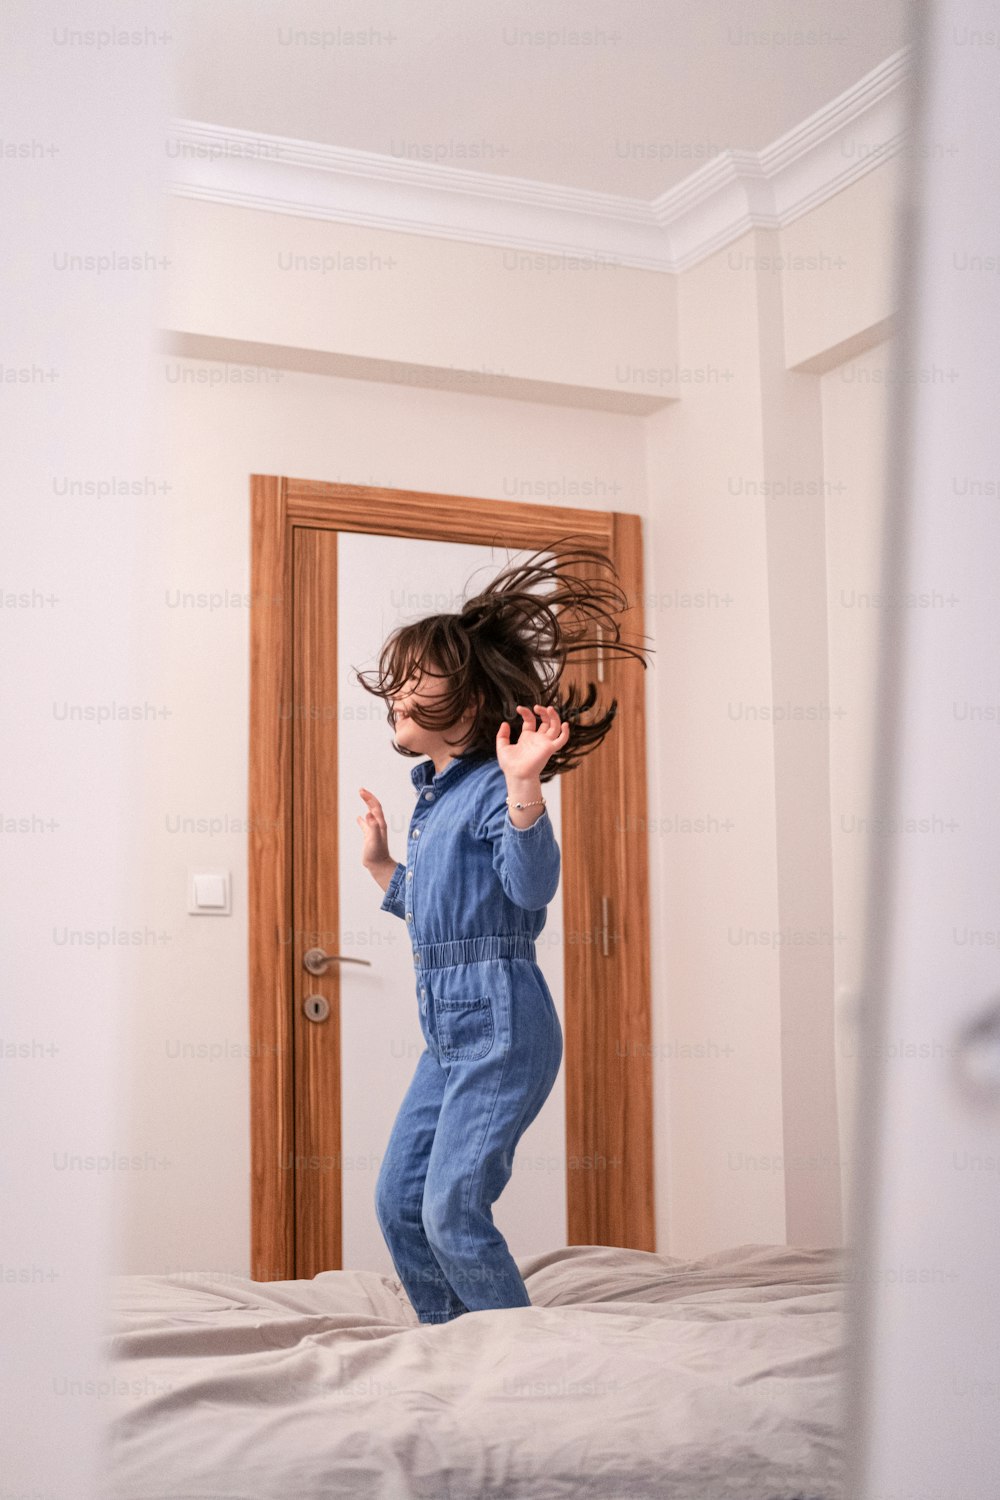 a young child jumping on a bed in a room